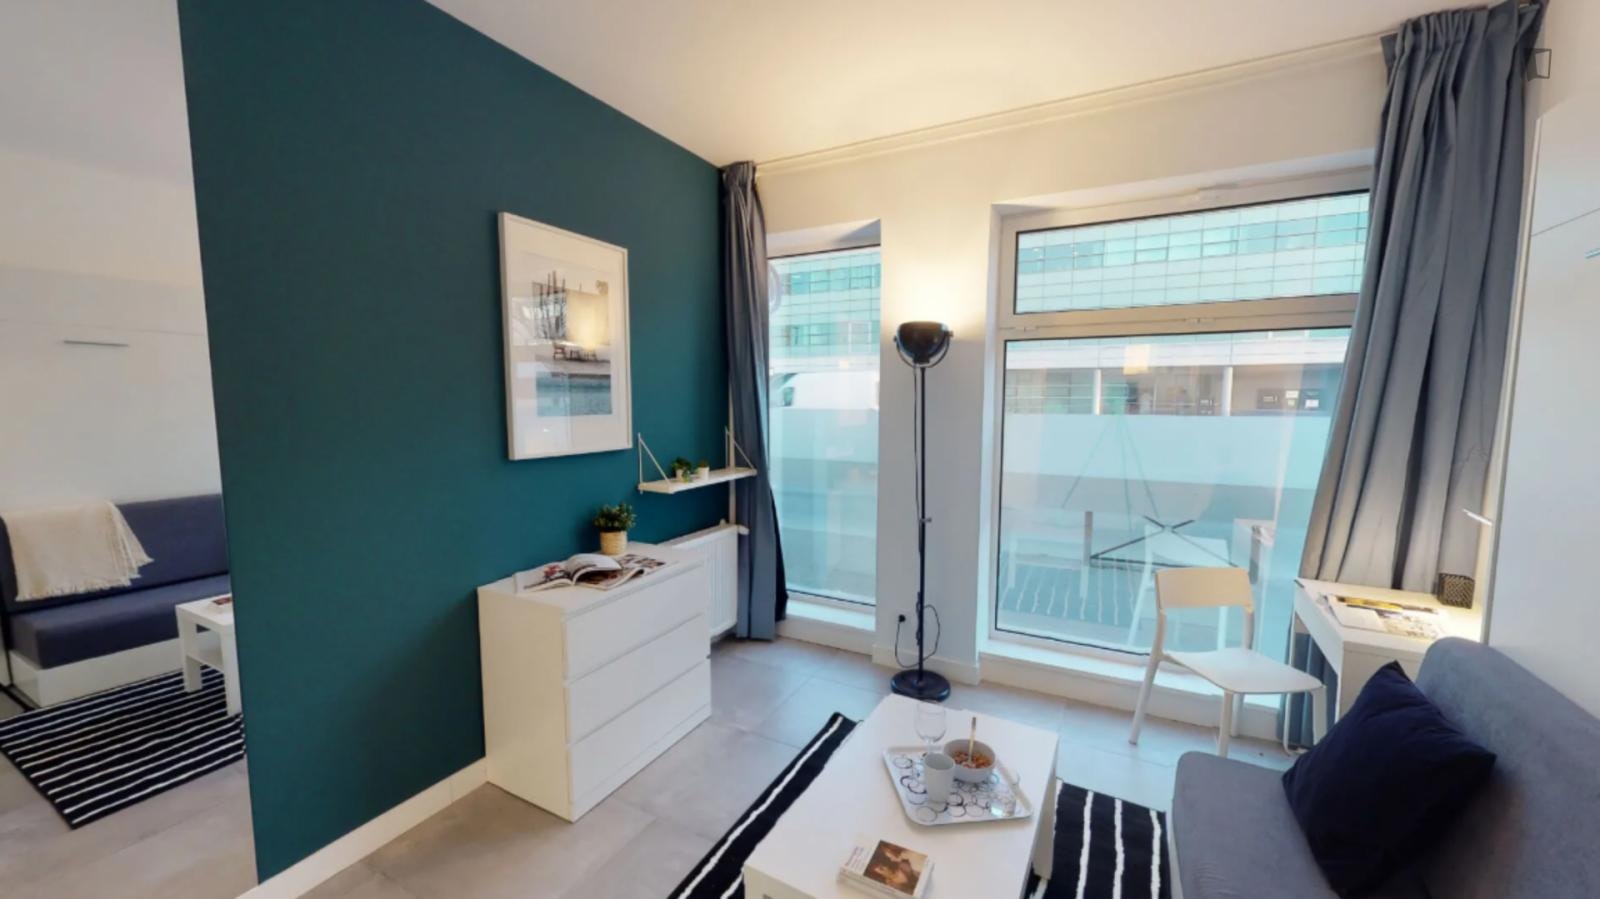 Appealing double ensuite bedroom in a 16-bedroom apartment close to Station Béquigneaux